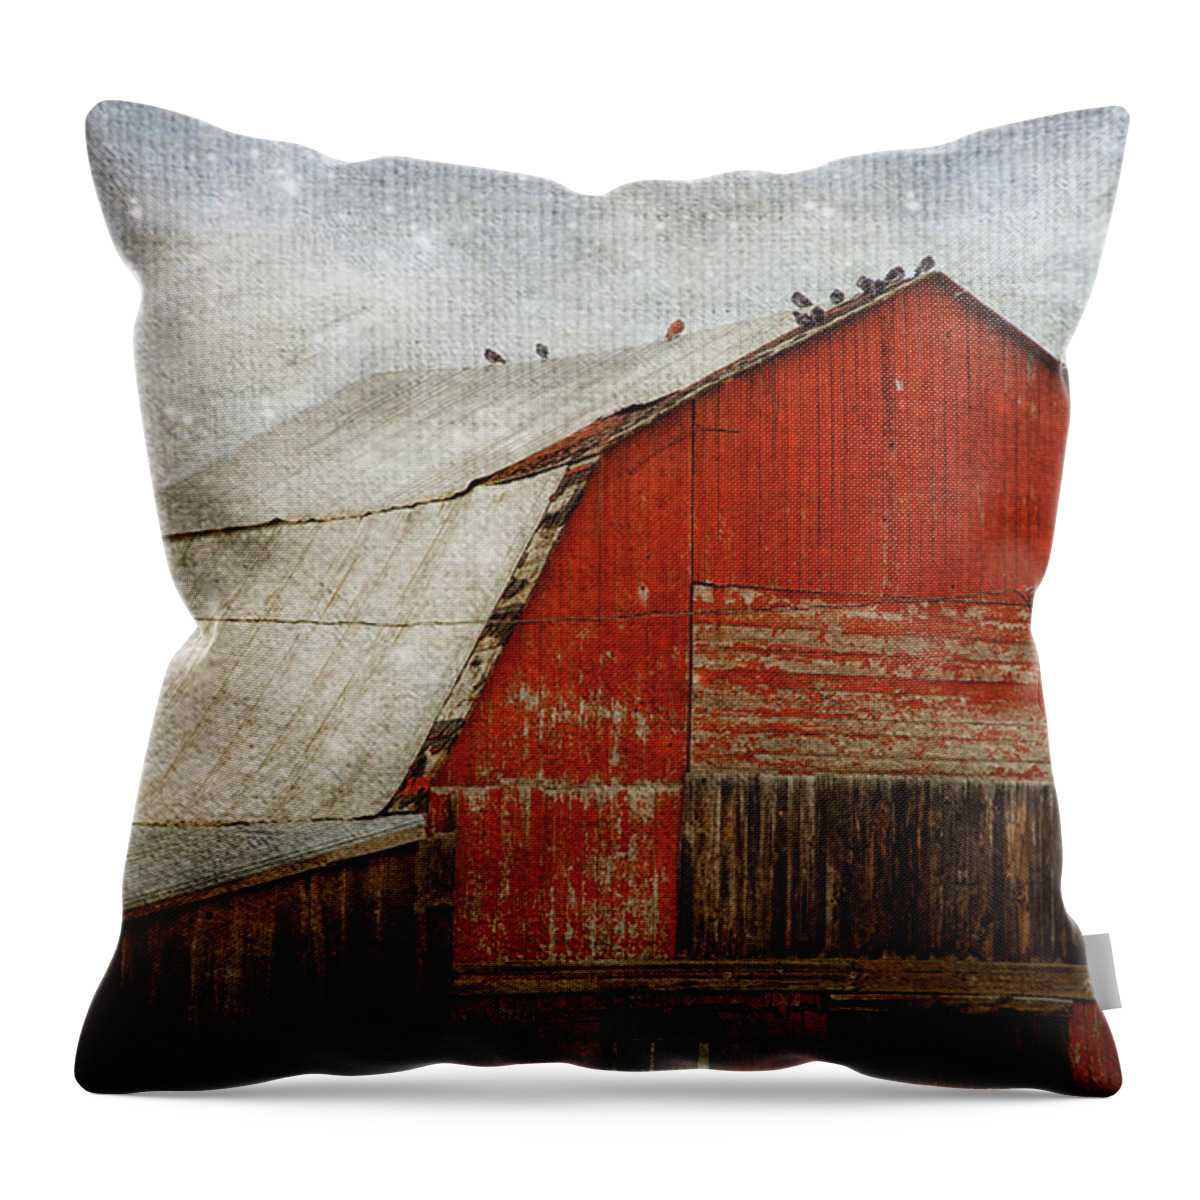 Barn Throw Pillow featuring the photograph Red Barn And First Snow by Theresa Tahara